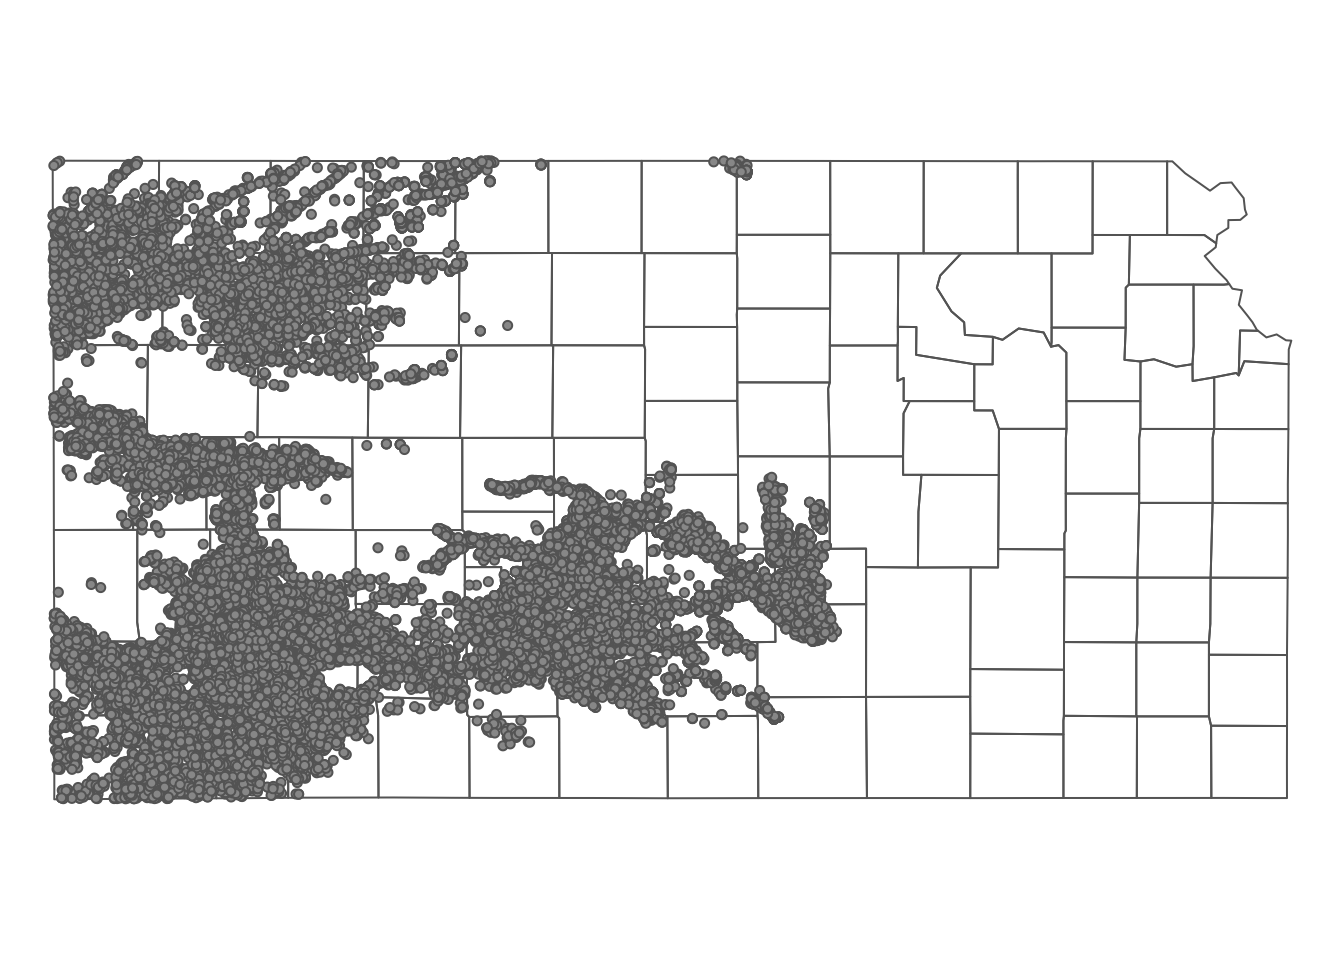 Kansas county boundaries and wells that overlie the HPA